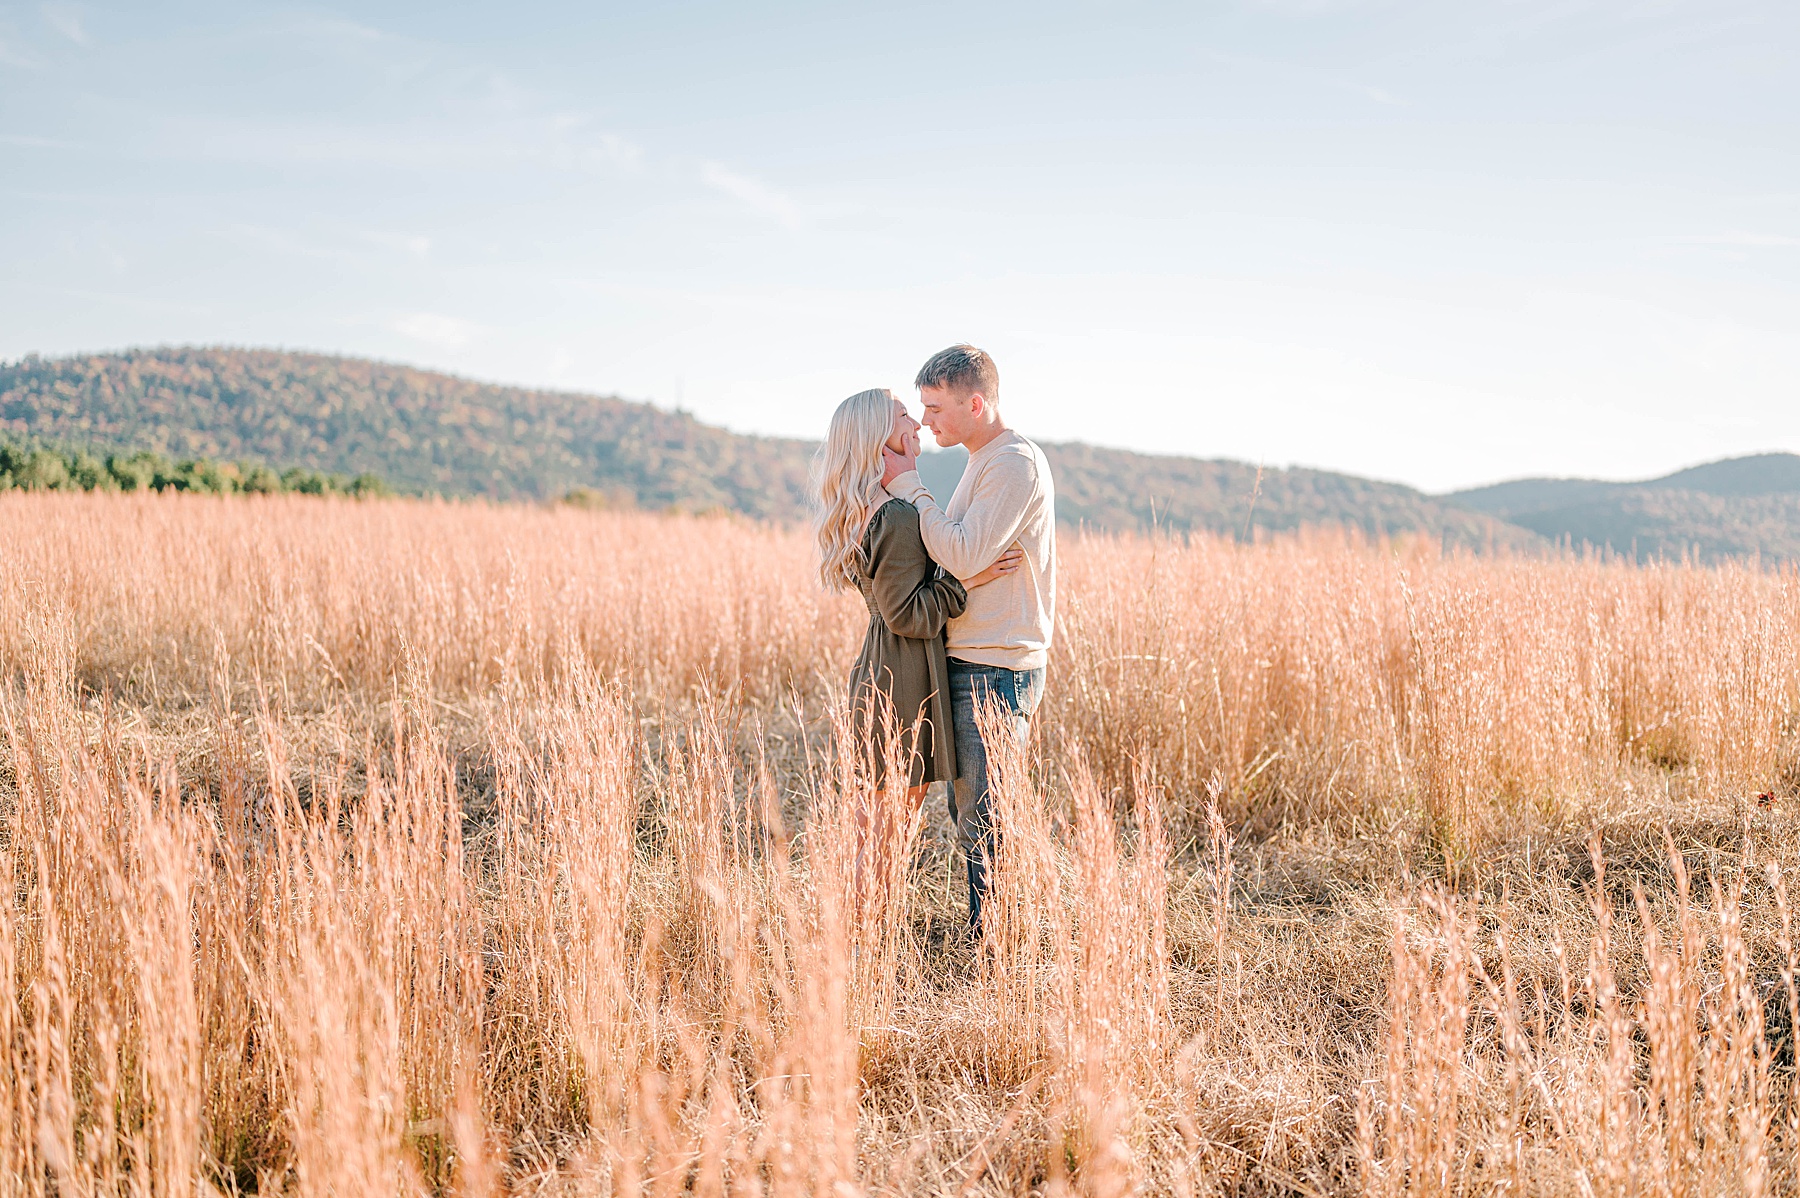 Couple in a tall grassy field